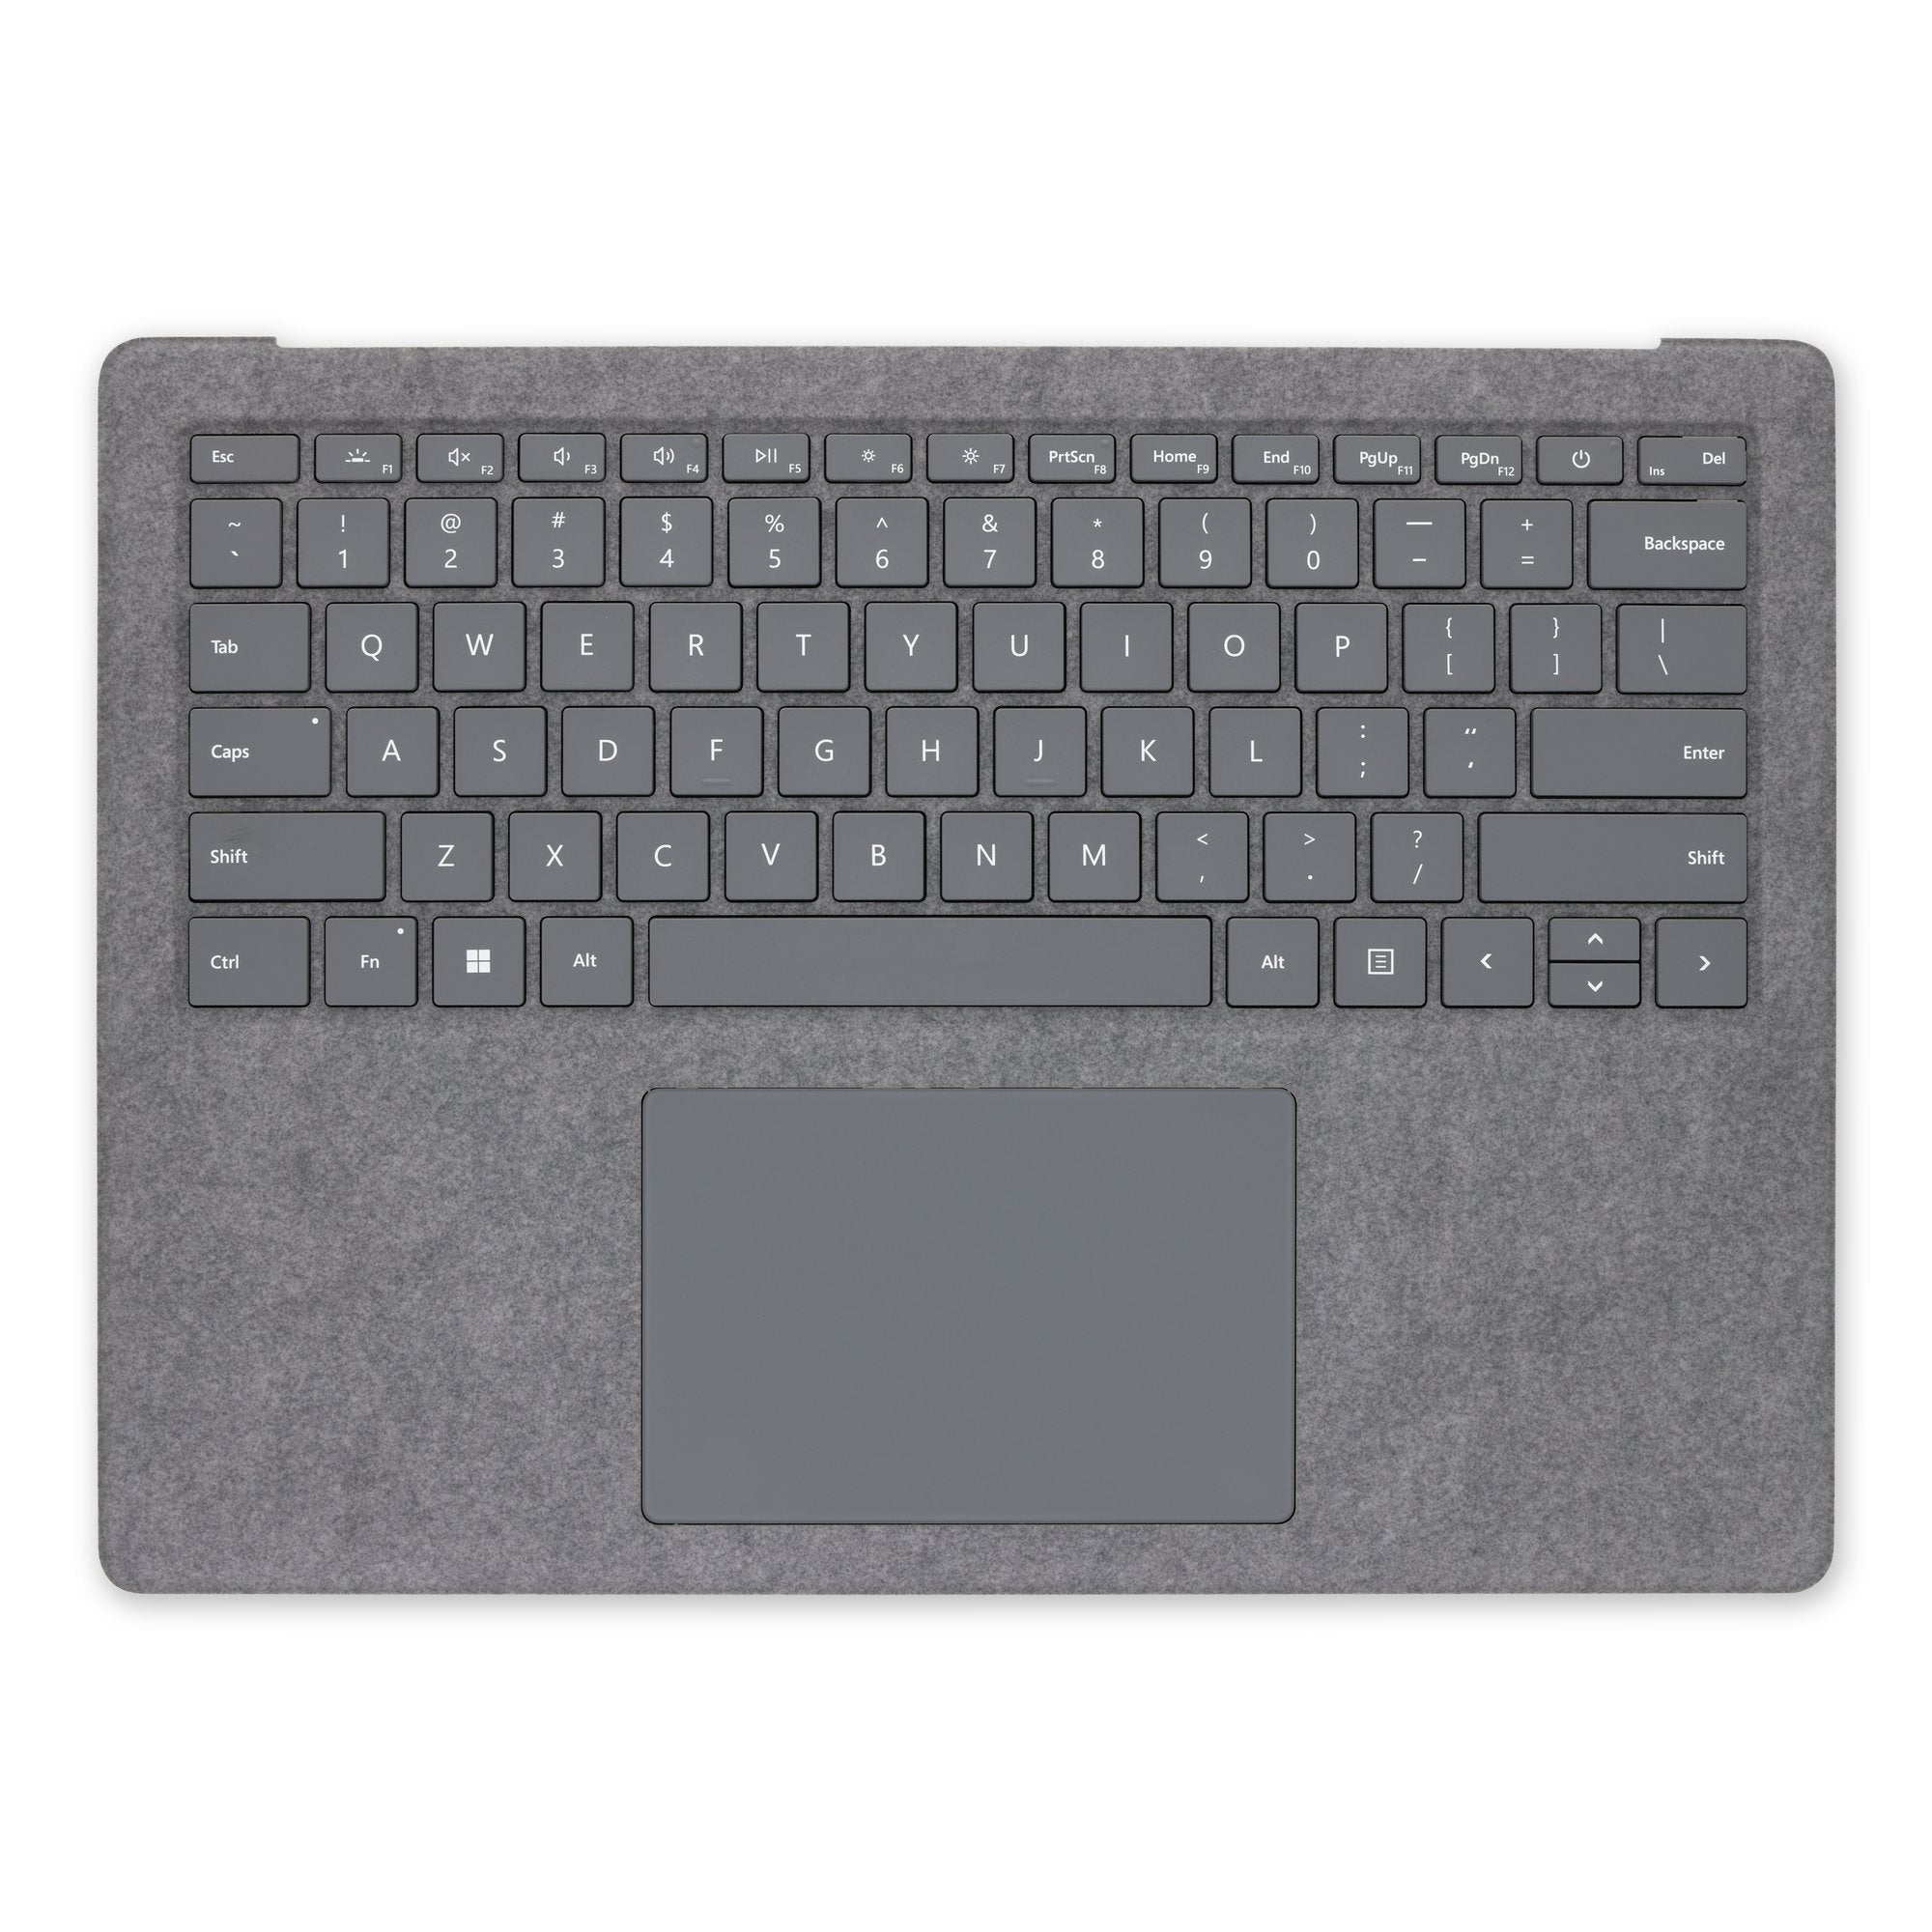 Surface Laptop 4 13.5" (Model 1950, 1958) Top Cover and Keyboard - Genuine Platinum Used, A-Stock English Keyboard